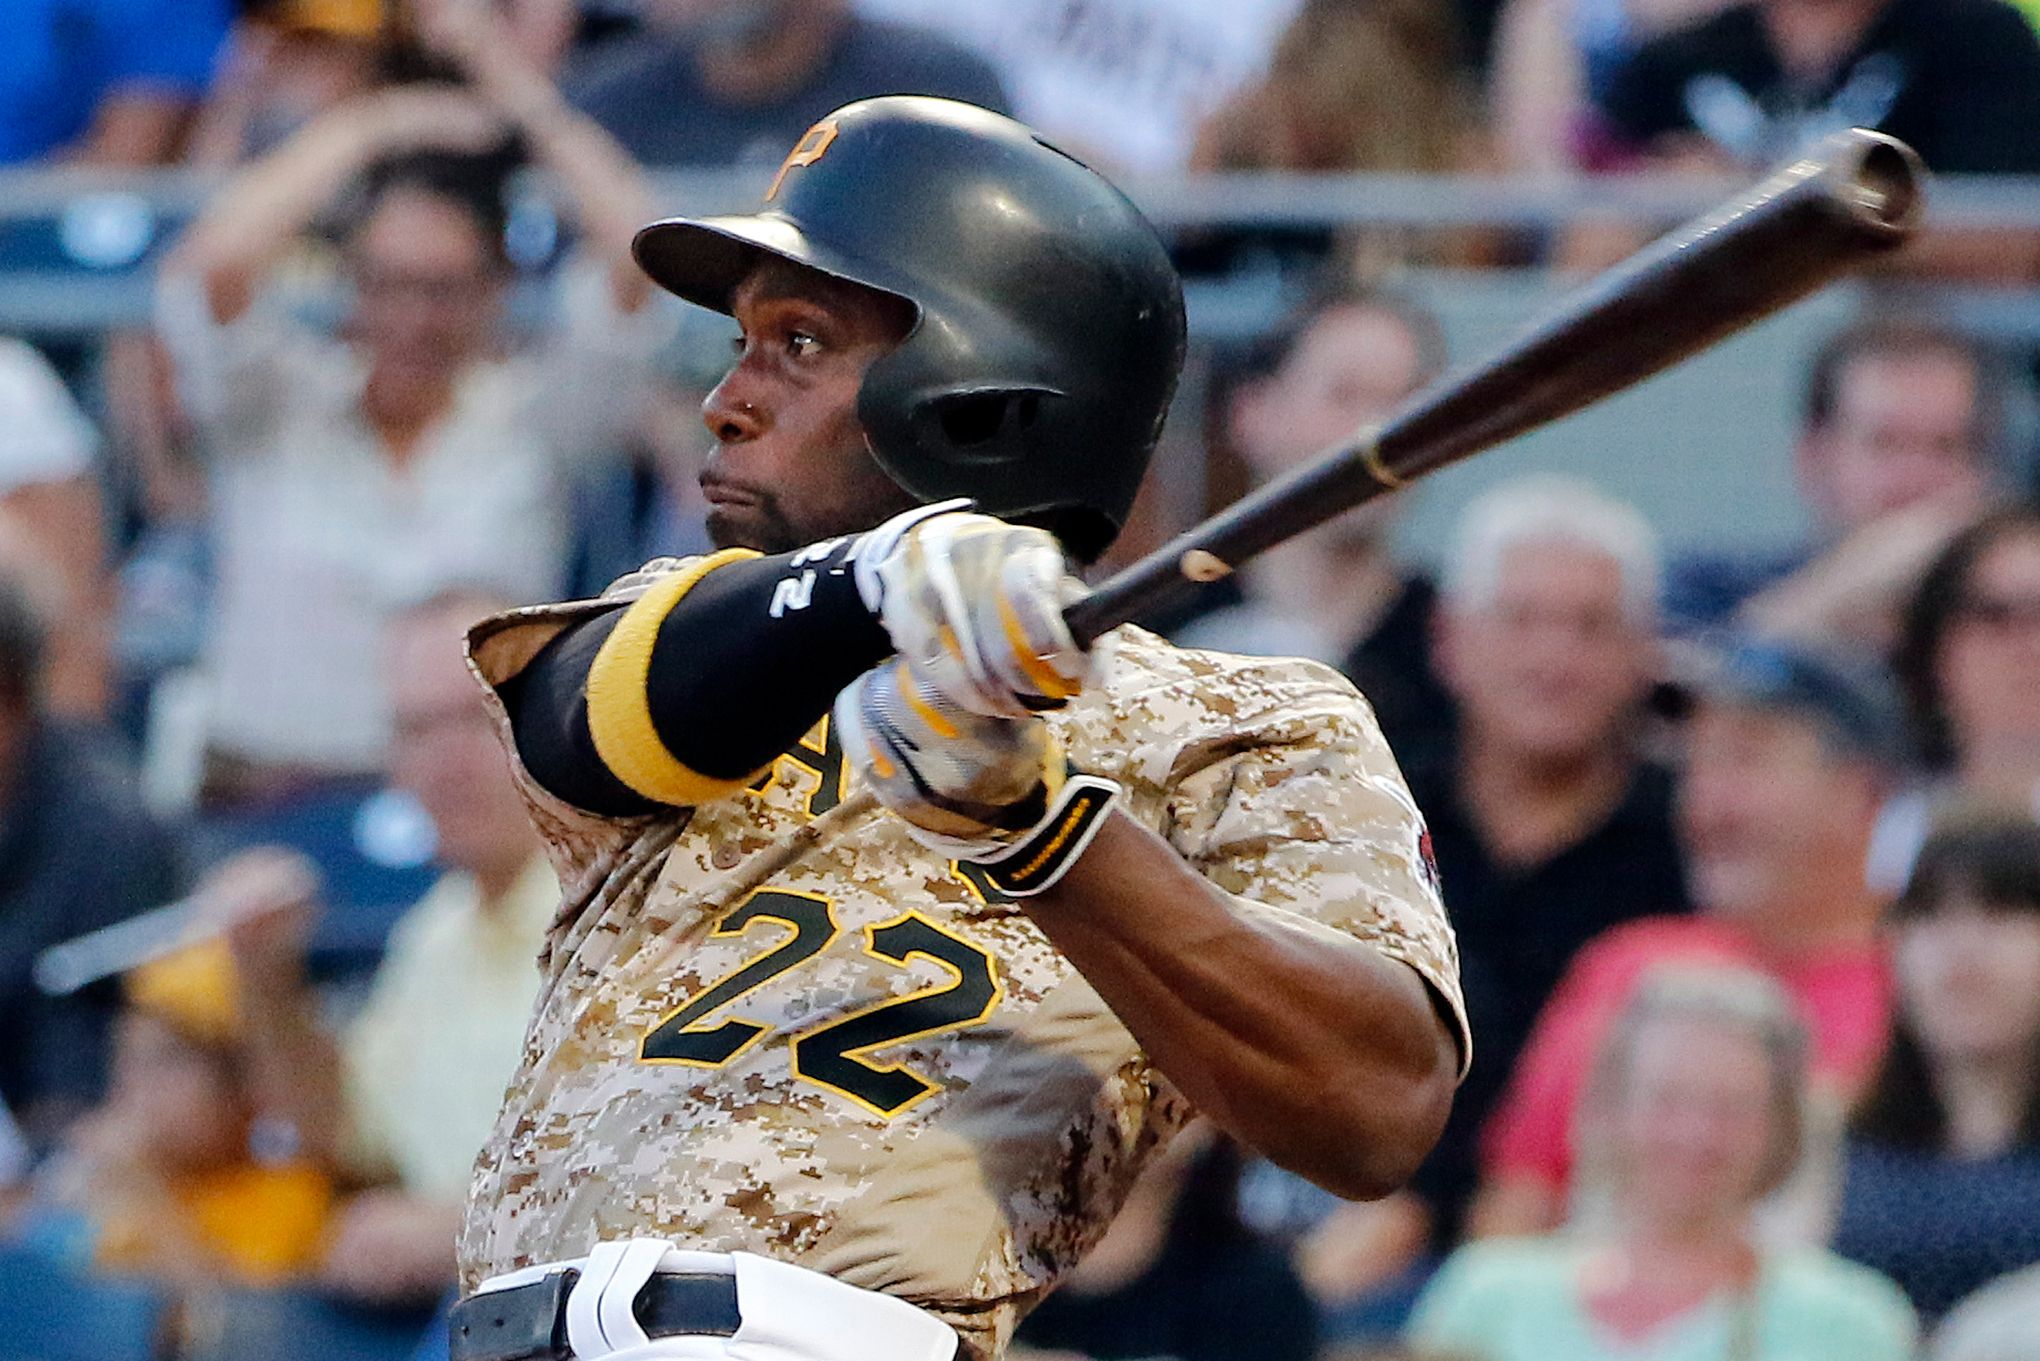 Is Pirates' Andrew McCutchen primed for another MVP run?